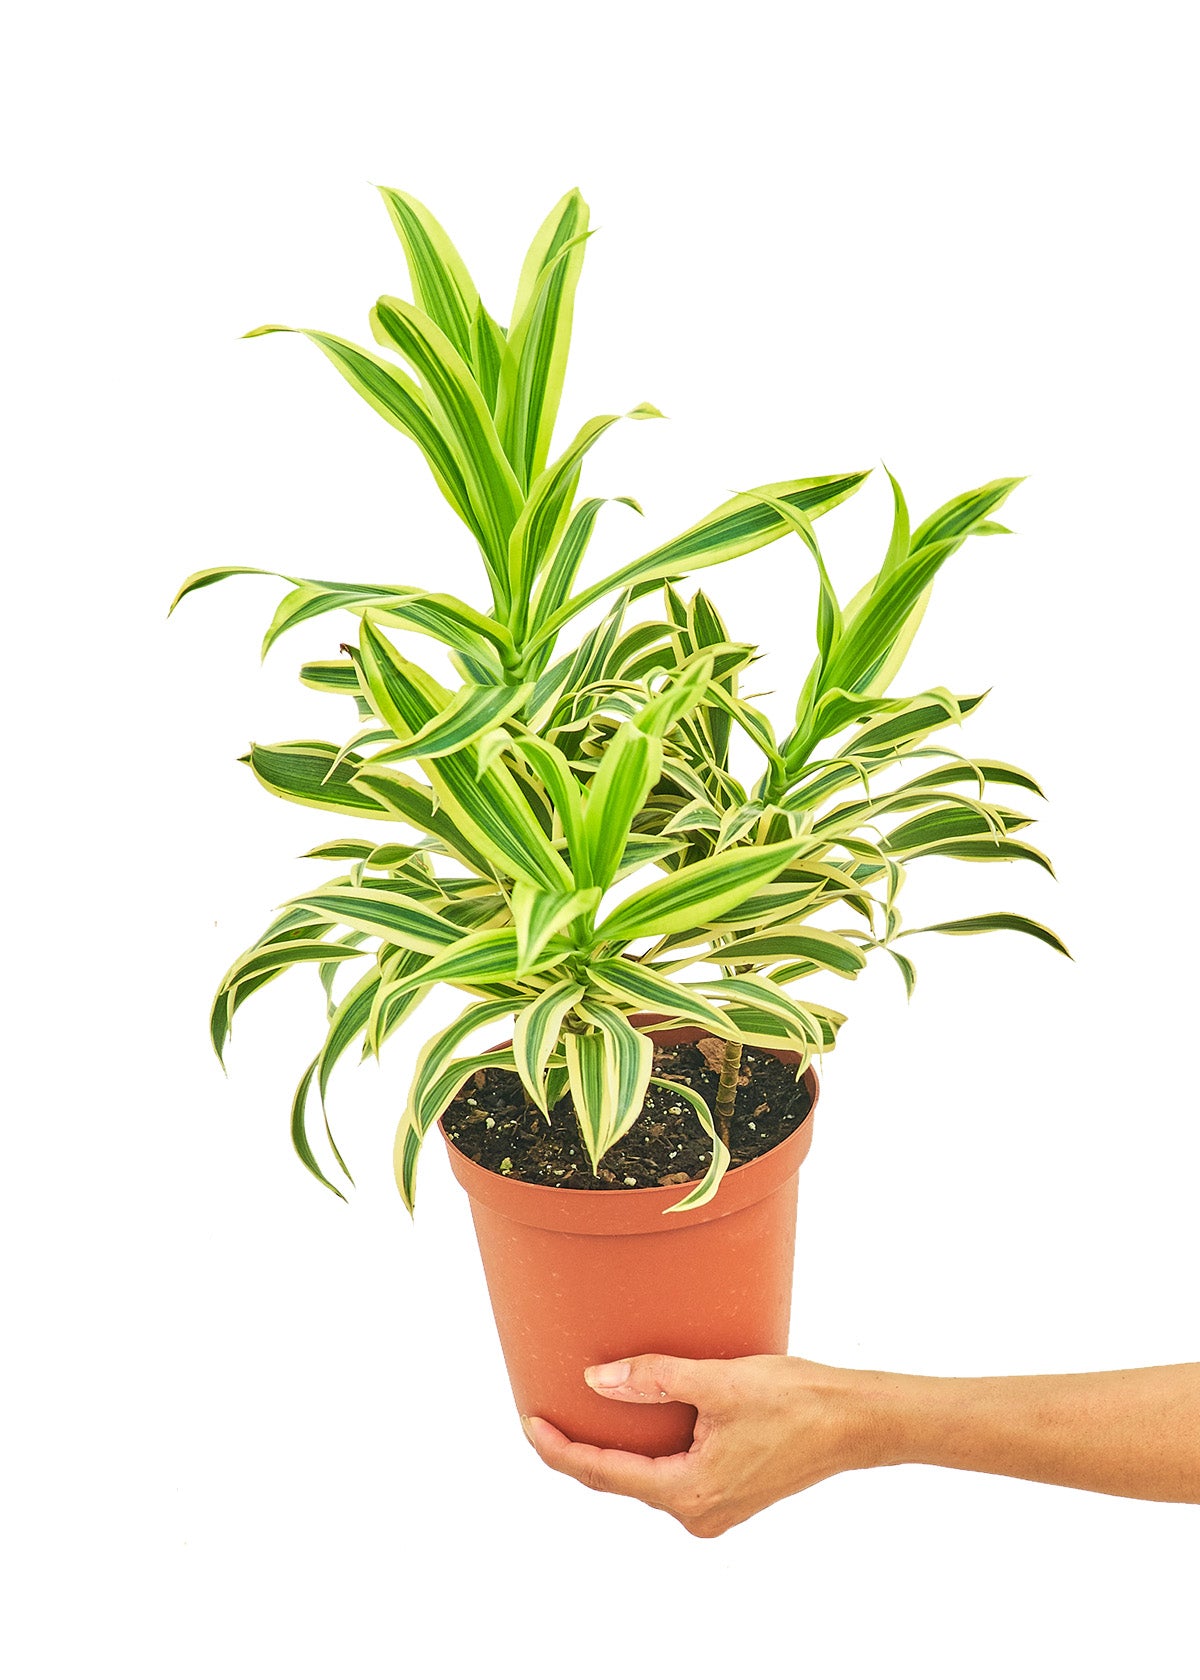 Medium size Darcaena Song Of India Plant in a growers pot with a white background with a hand holding the pot to show the top view